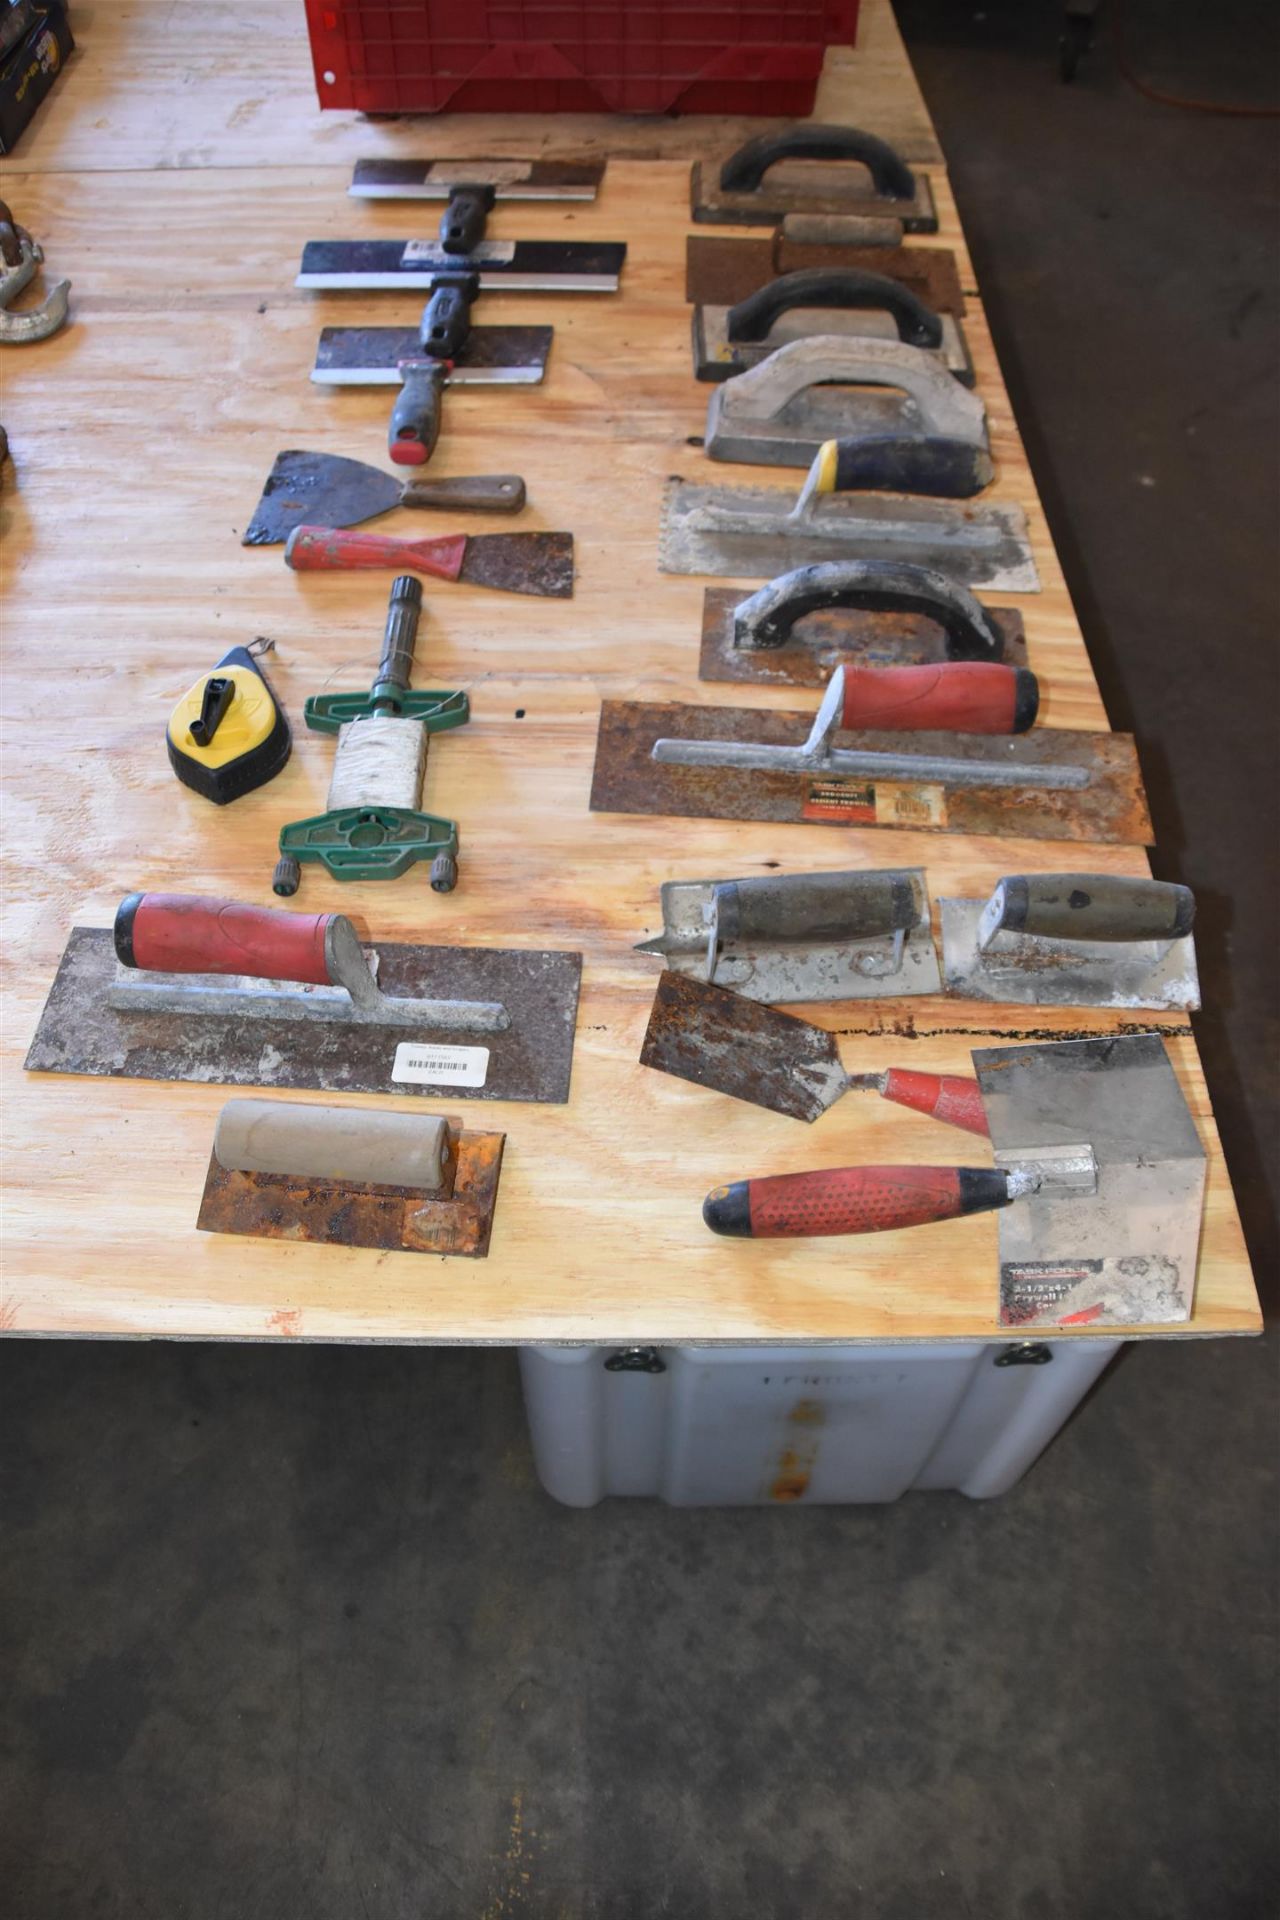 Trowels, Knives and Scrapers